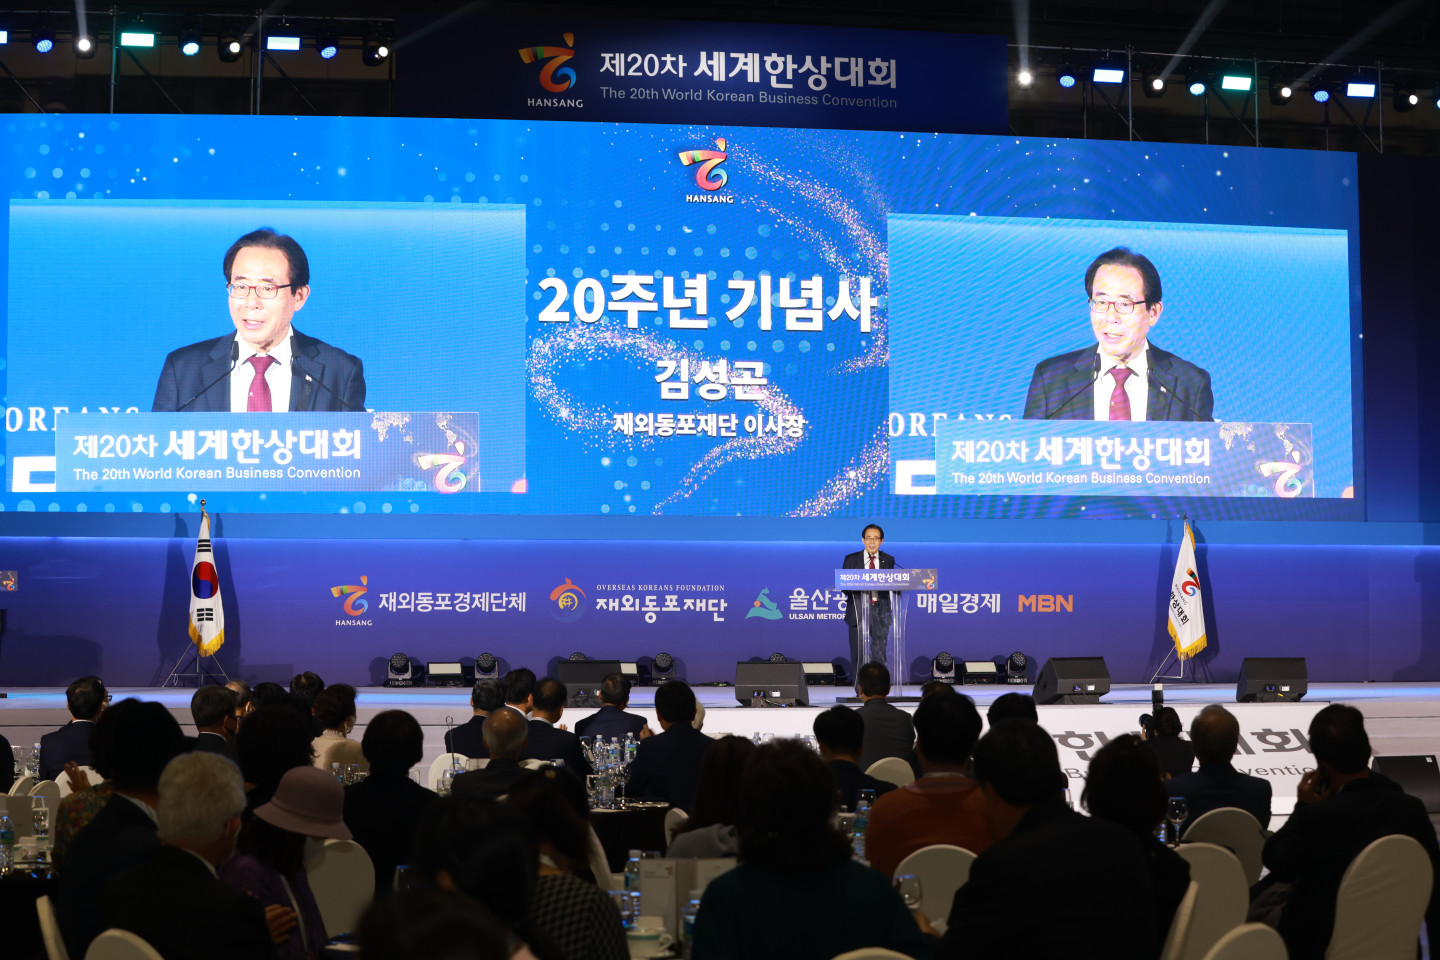 Chairman Kim Sung-kon delivering his commemorative address at the 20th anniversary event of the Korean World Business Convention